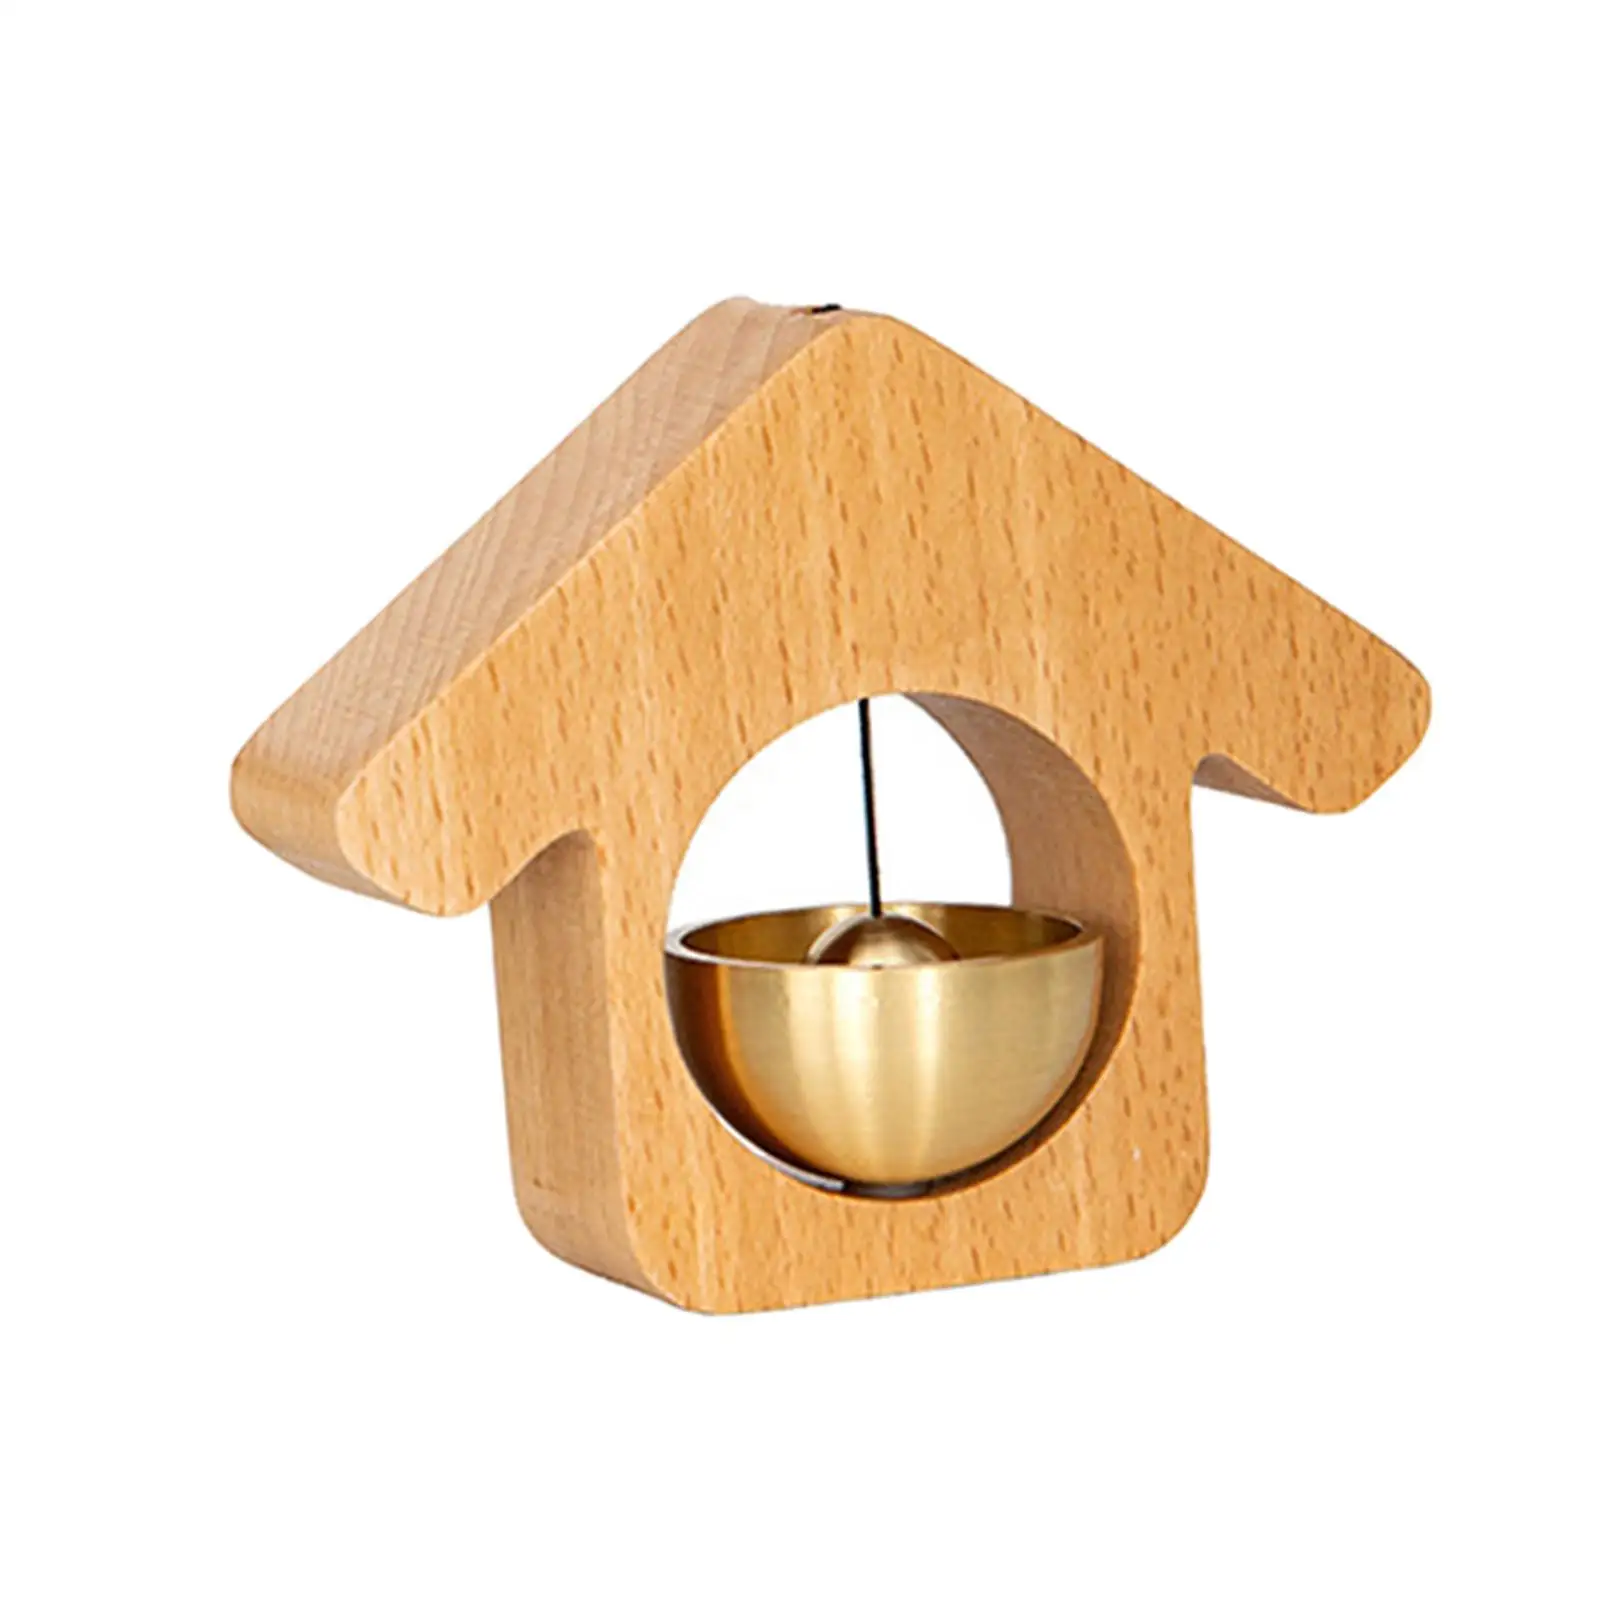 Wood Shopkeepers Bell Decorative for Farmhouse Wardrobe Housewarming Gifts